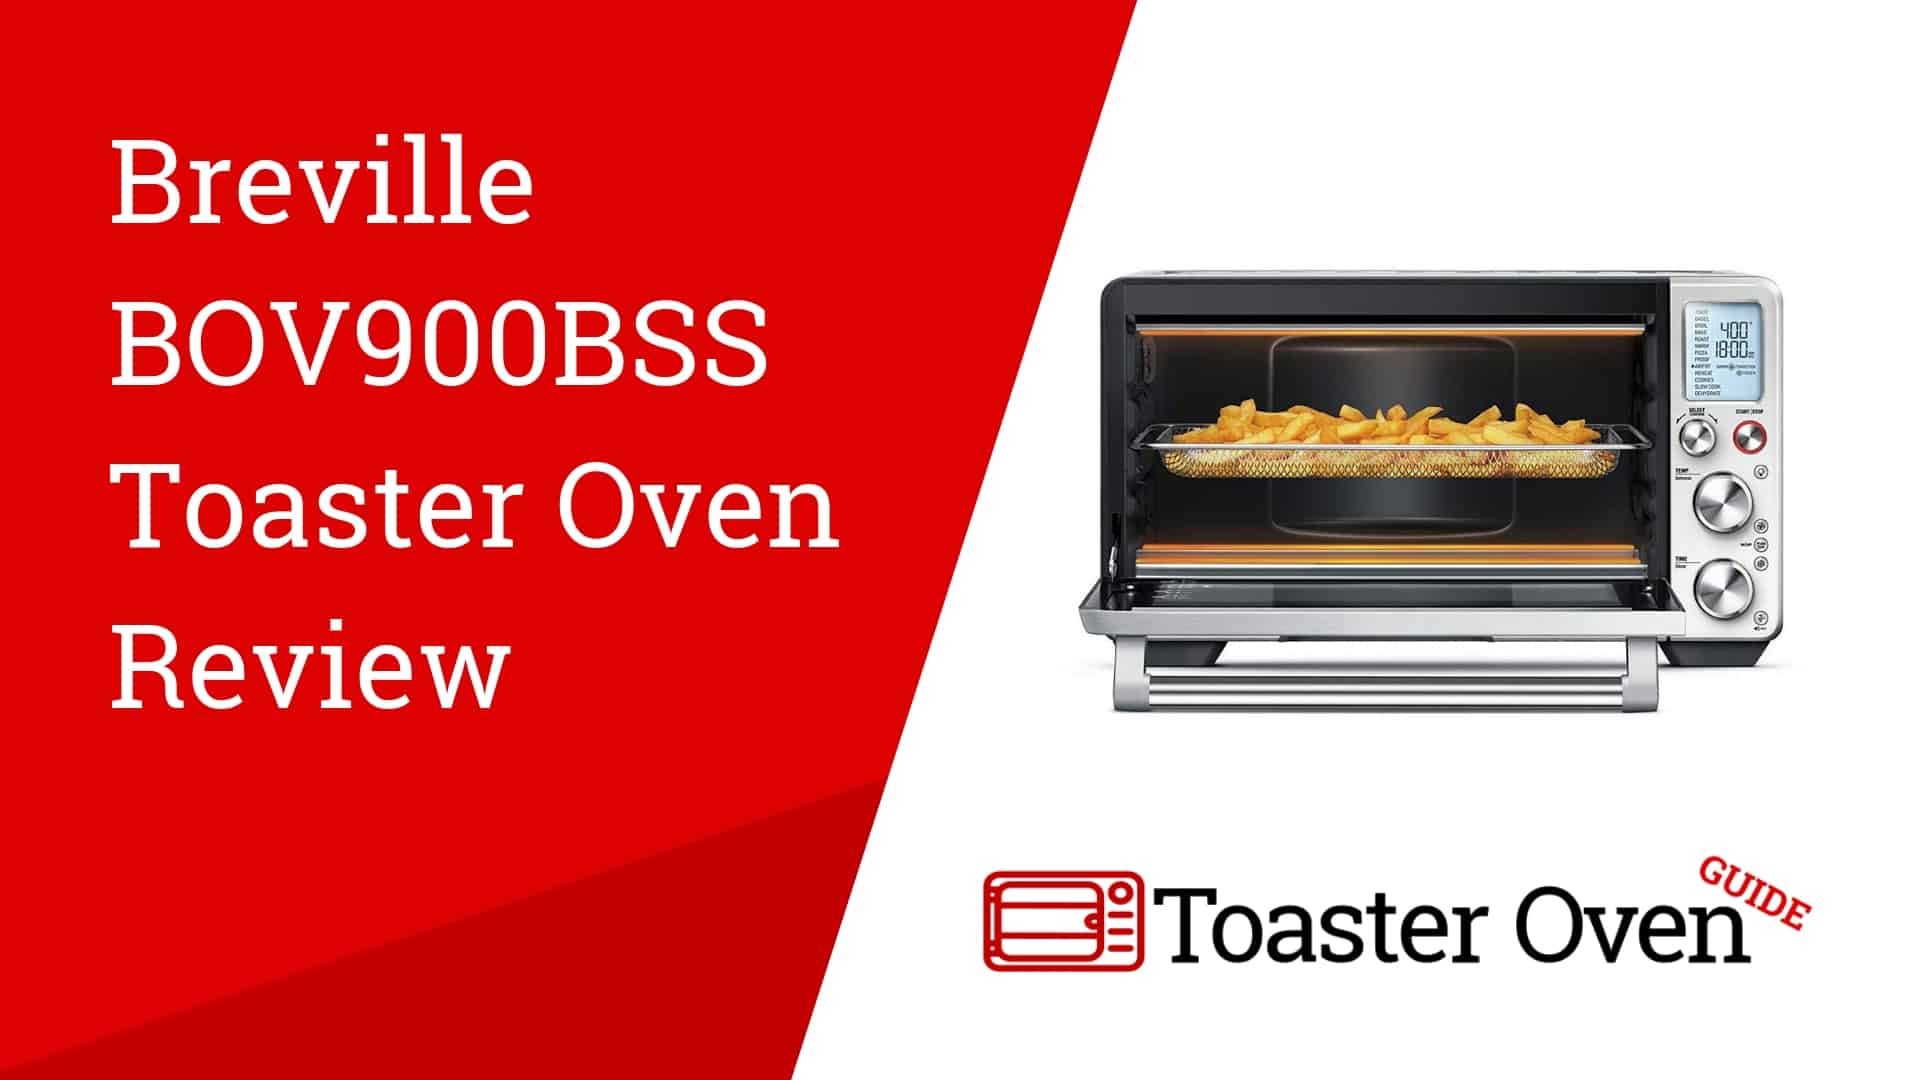 https://www.toasterovenguide.com/wp-content/uploads/2019/05/Breville-BOV900BSS-Toaster-Oven-Review.jpg